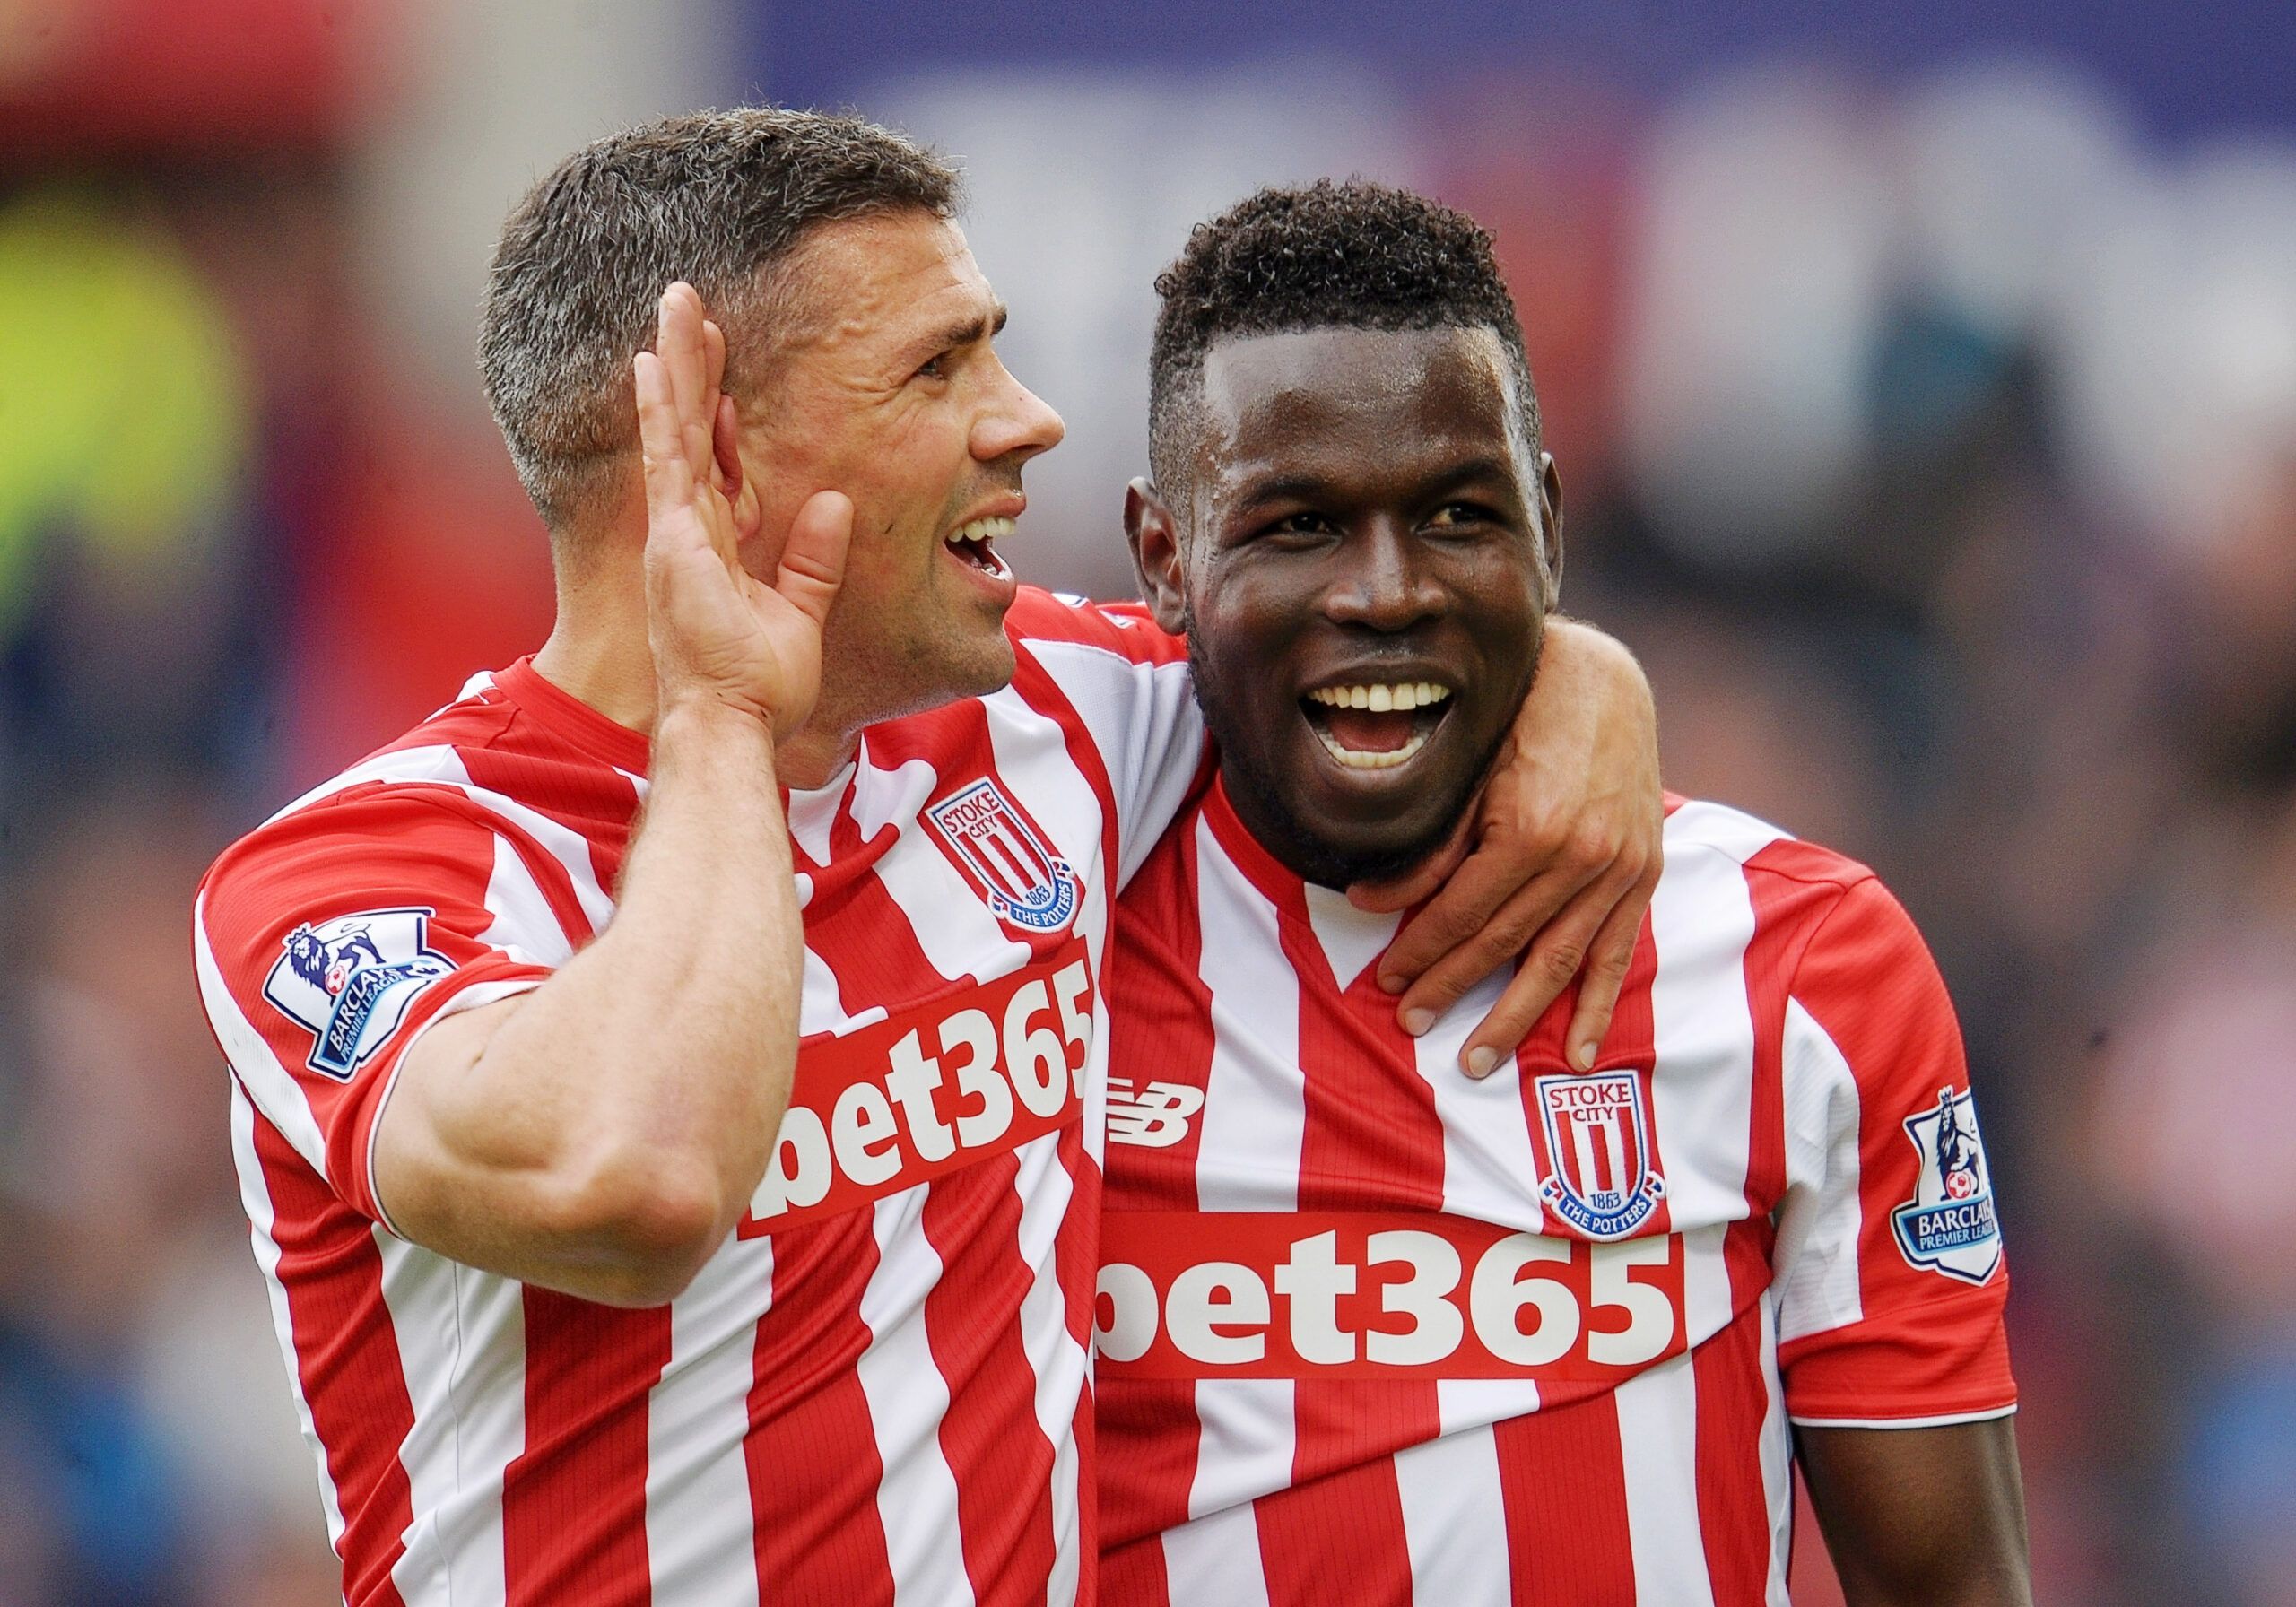 Football - Stoke City v Liverpool - Barclays Premier League - Britannia Stadium - 24/5/15 
Stoke City's Mame Biram Diouf celebrates scoring their first goal with Jonathan Walters 
Action Images via Reuters / Paul Burrows 
Livepic 
EDITORIAL USE ONLY. No use with unauthorized audio, video, data, fixture lists, club/league logos or 